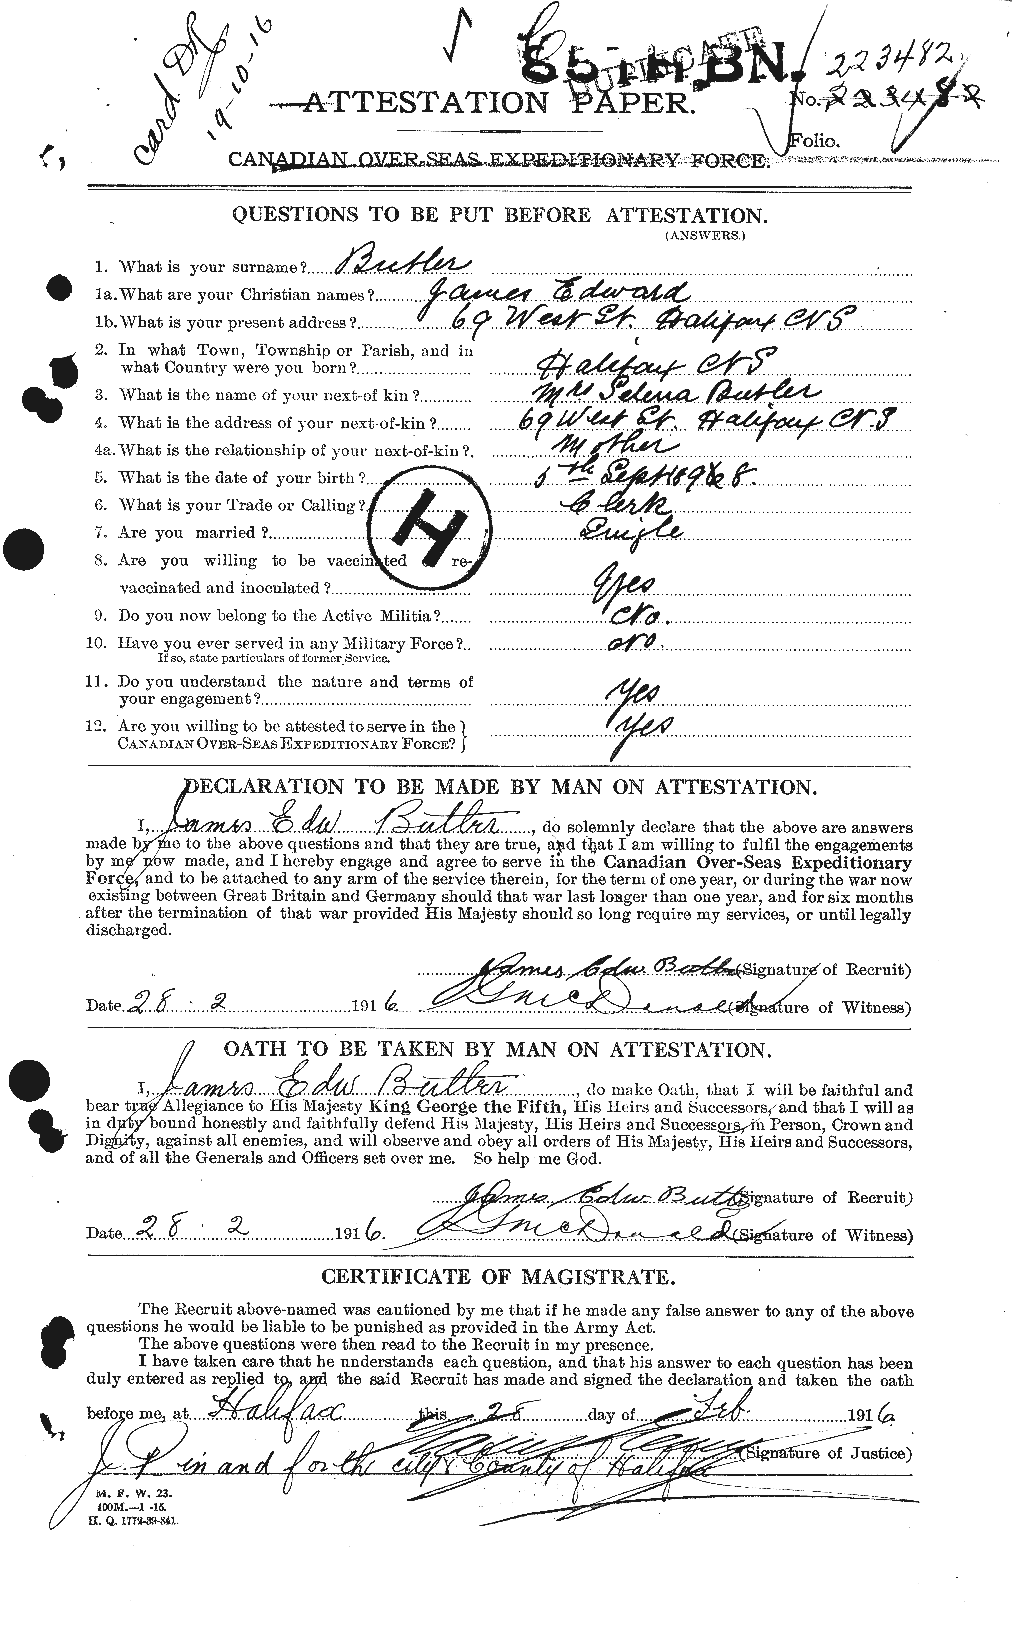 Personnel Records of the First World War - CEF 275996a